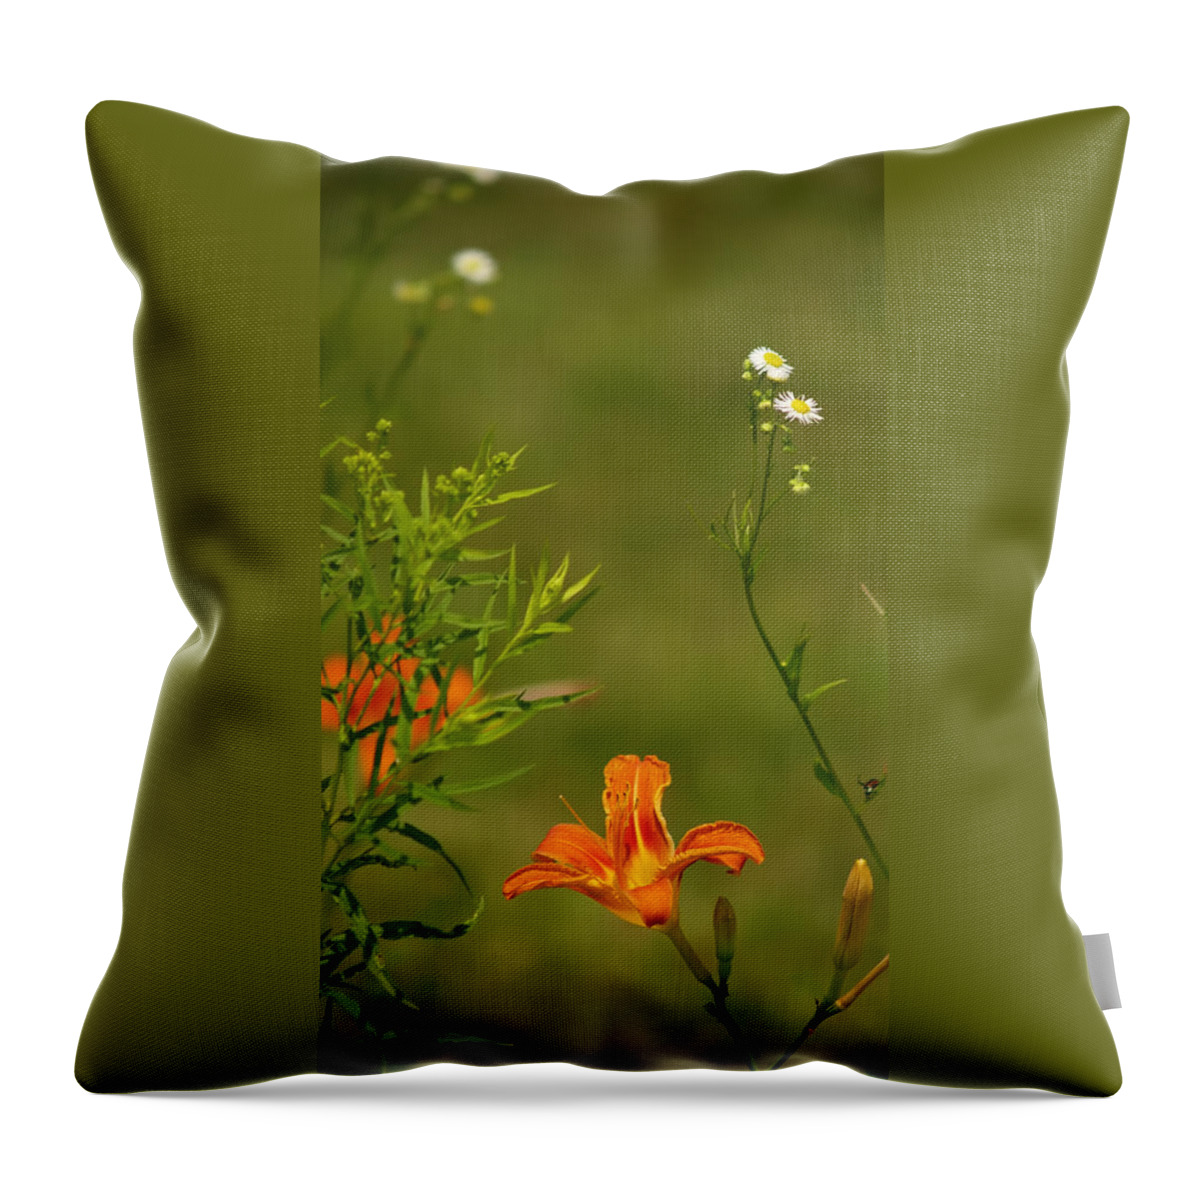 Flowers Throw Pillow featuring the photograph Wildlfowers In Summertime by Dorothy Lee